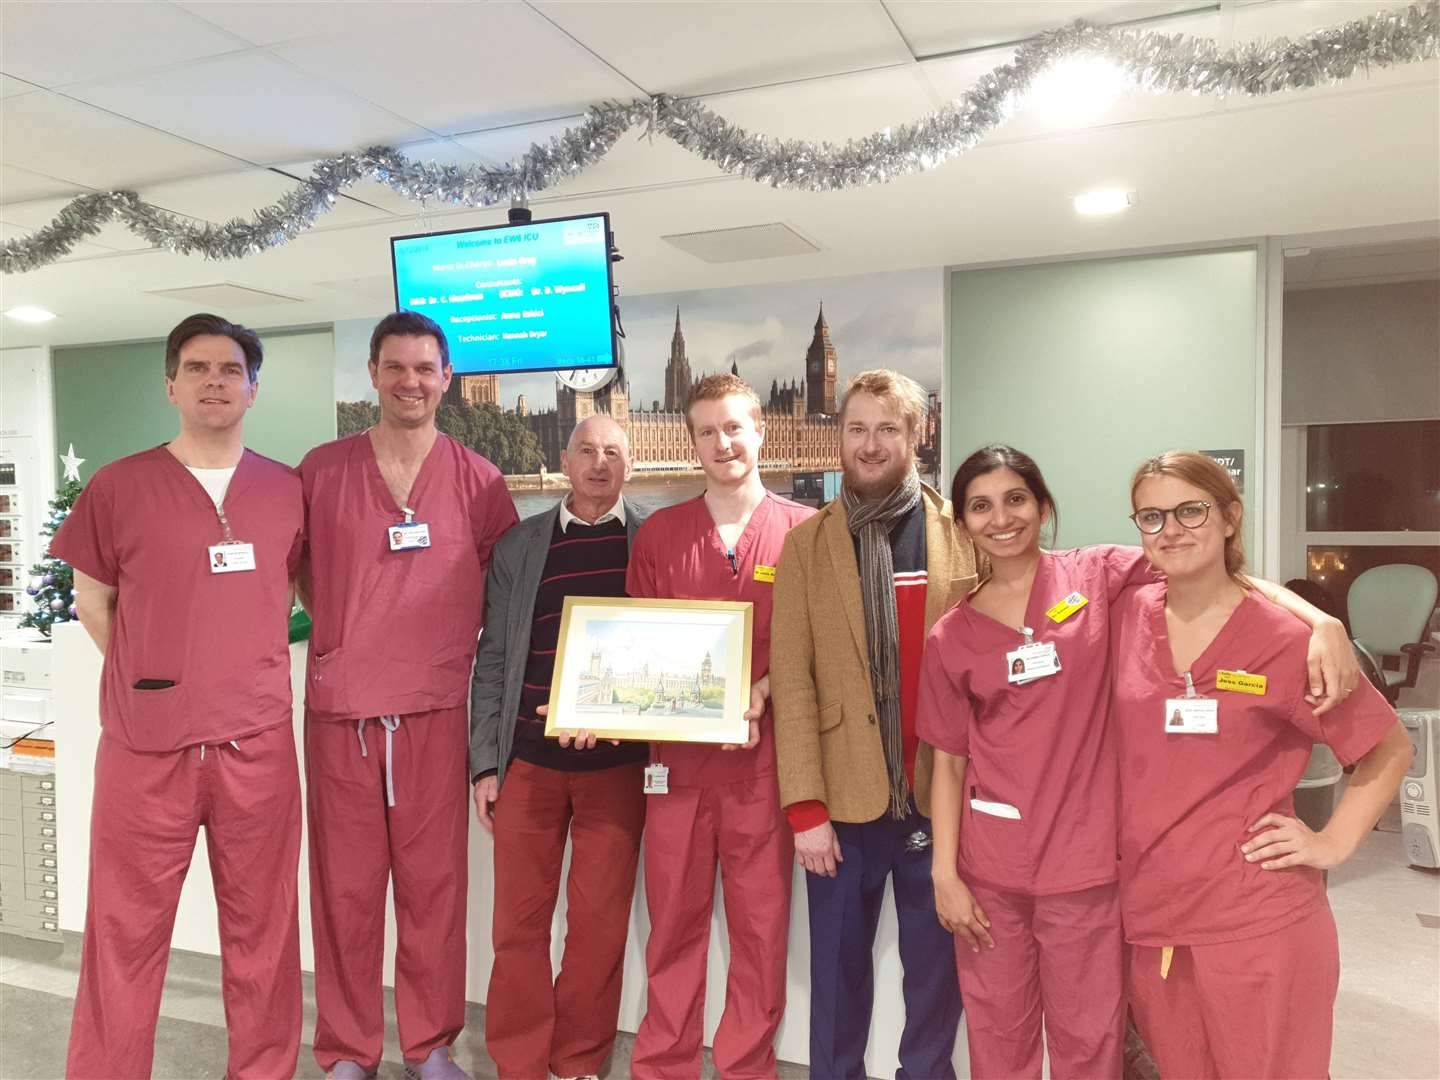 Jack Burnham and his dad Tom revisited staff at St Thomas' in December and presented a painting by Tom of the view from the ward window